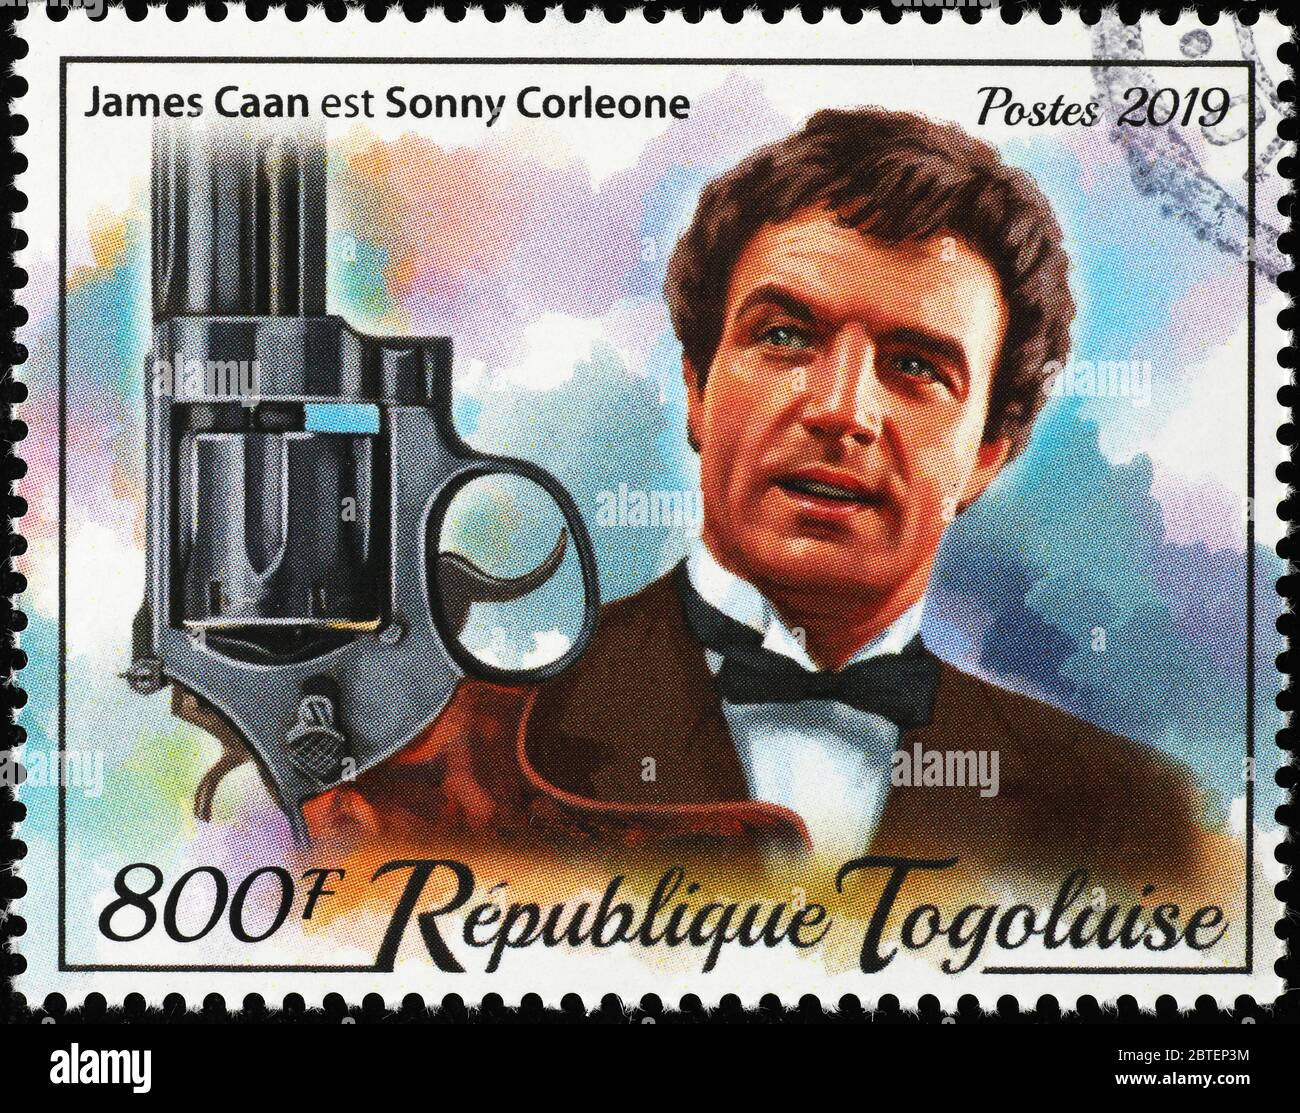 James Caan as Sonny Corleone on postage stamp Stock Photo